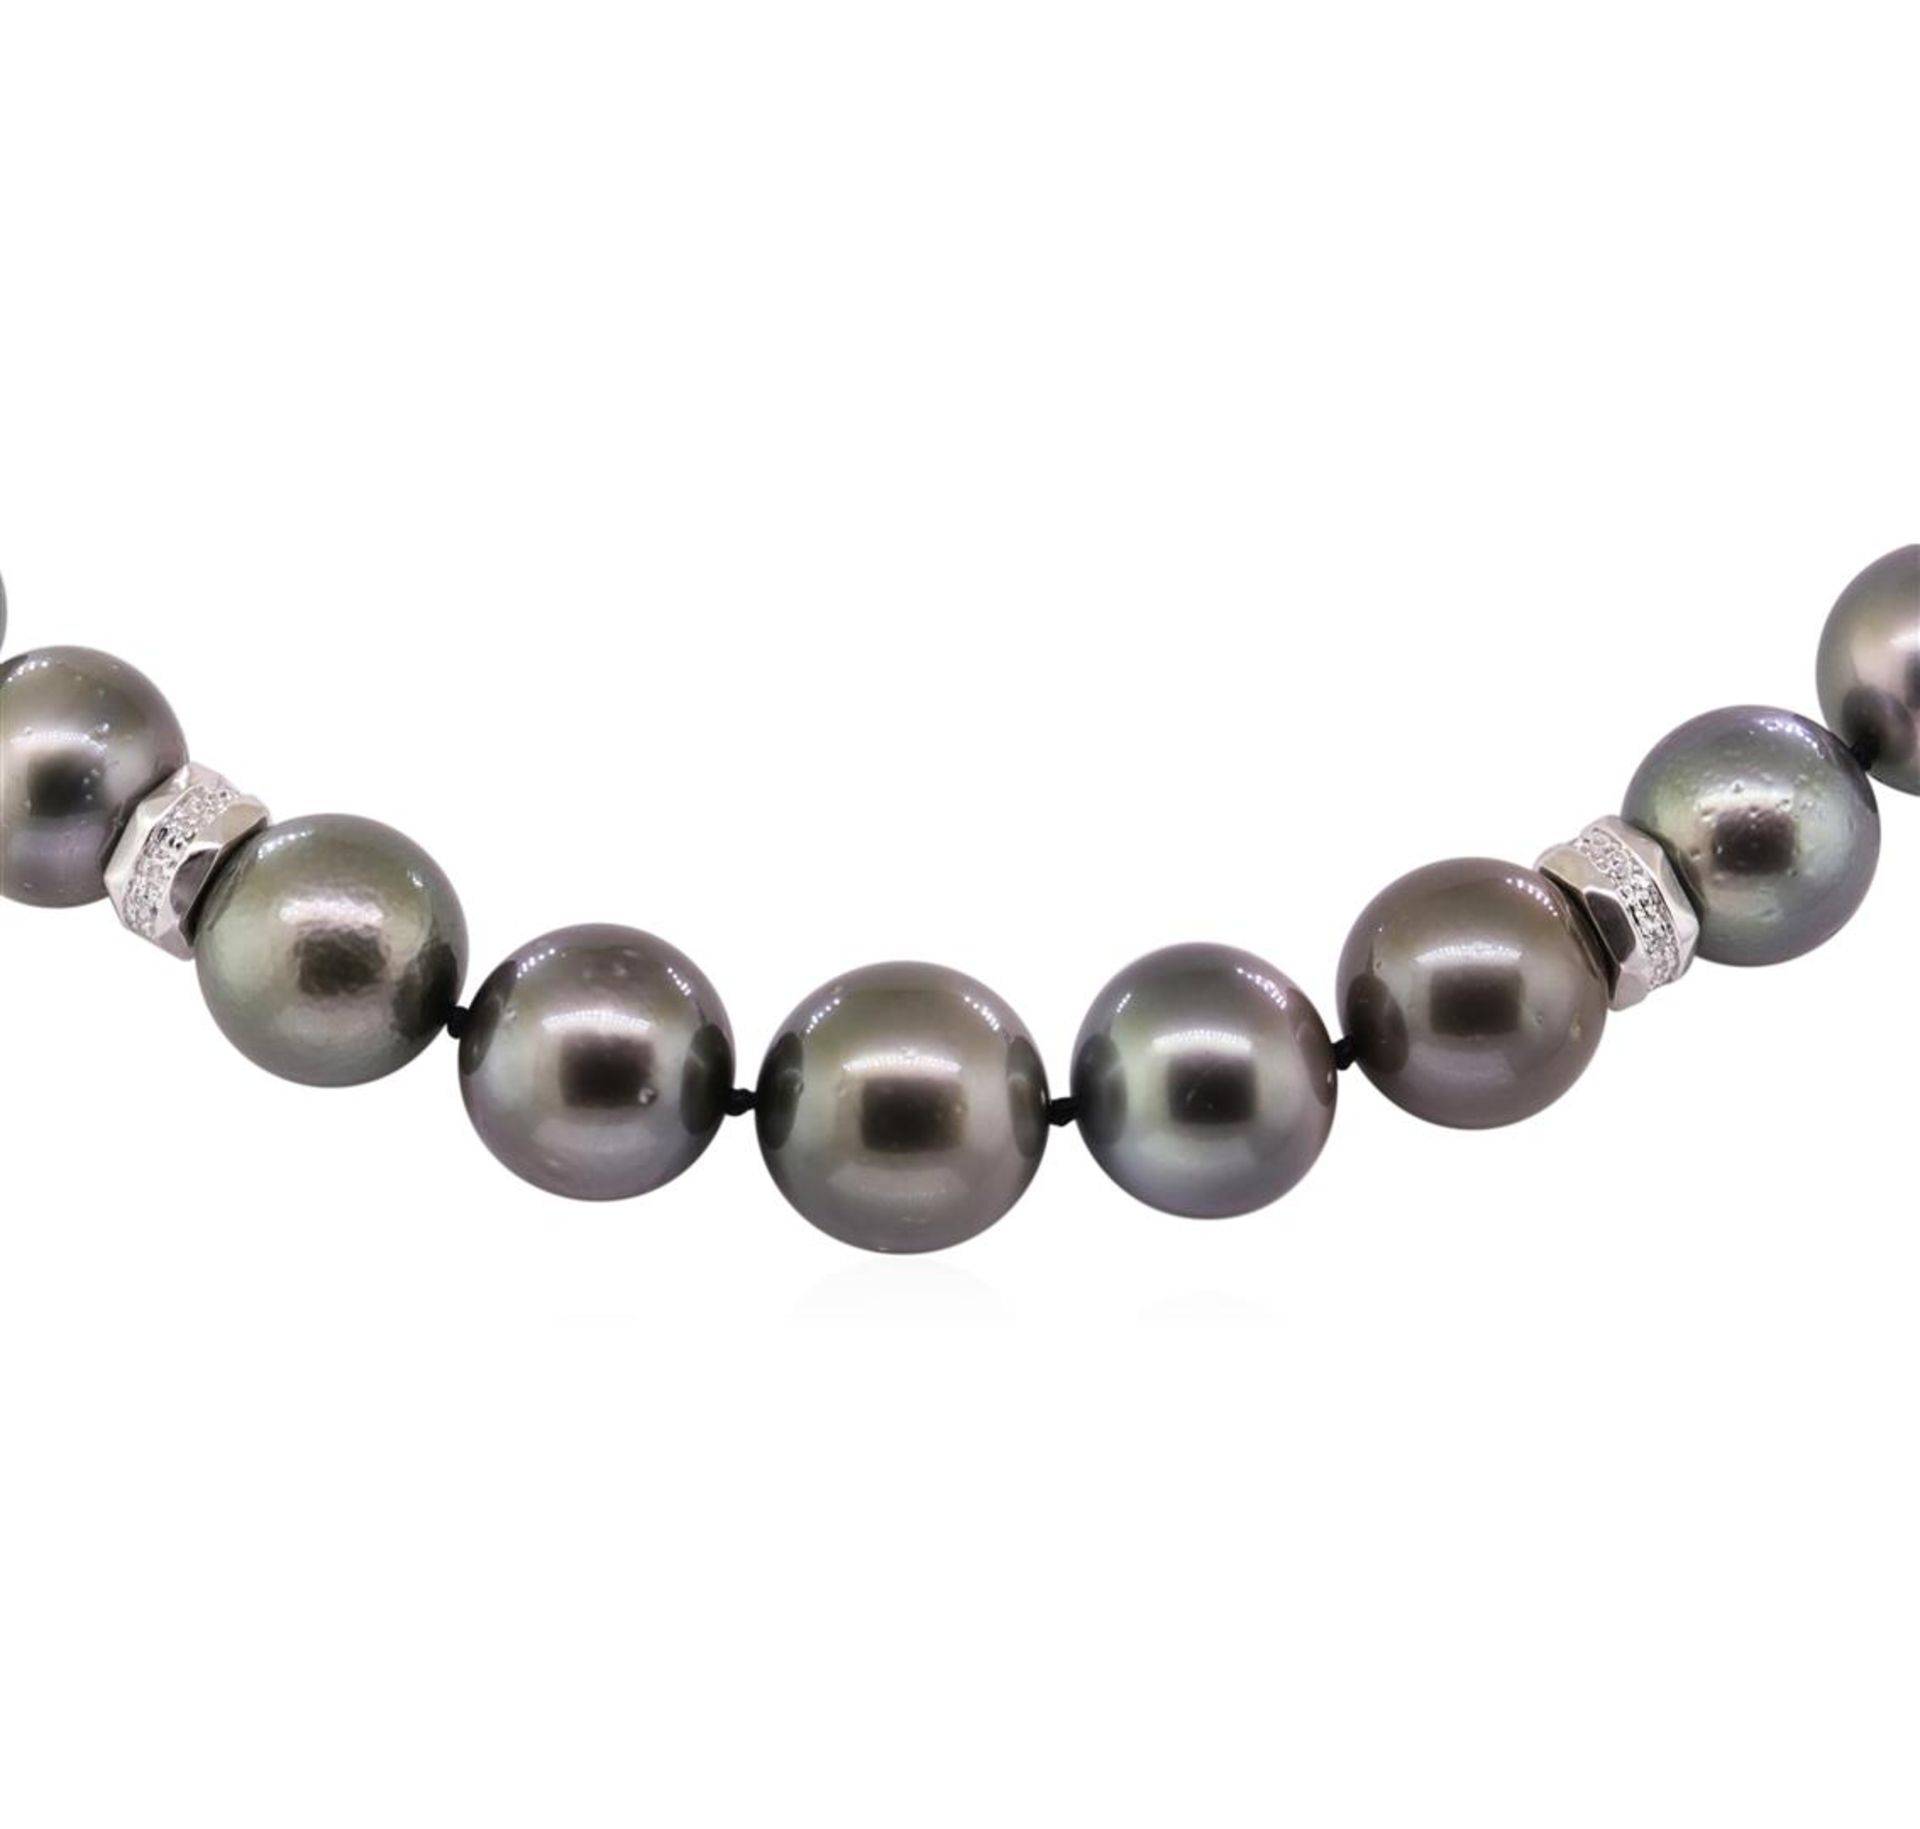 0.67 ctw Diamond and Tahitian Pearl Necklace - 14KT White Gold - Image 2 of 4